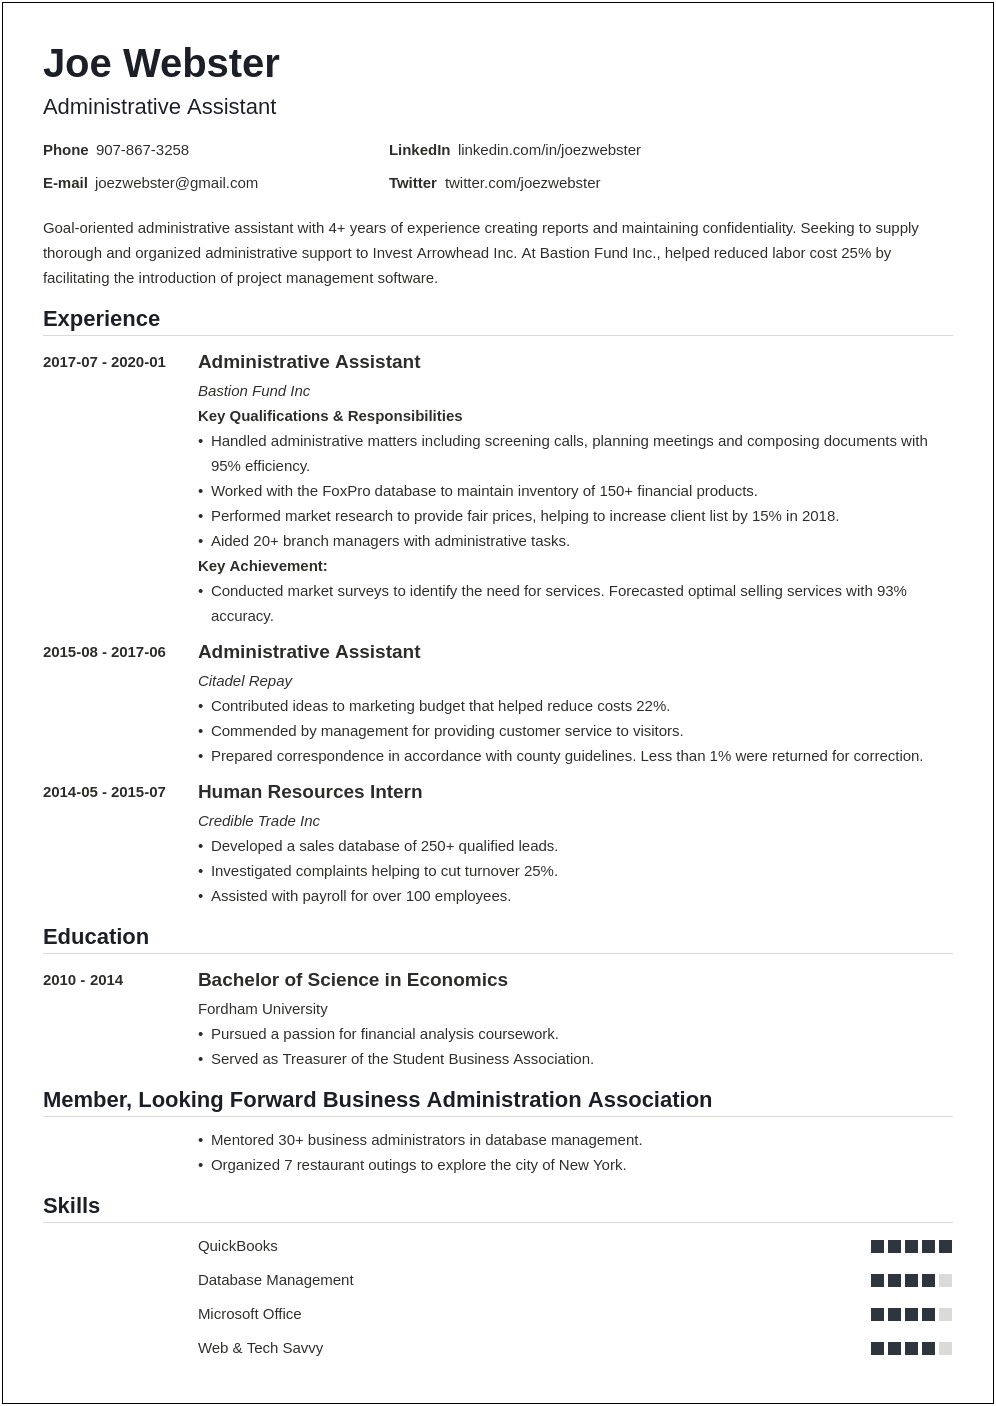 Examples Of Objectives On A Resume In Business